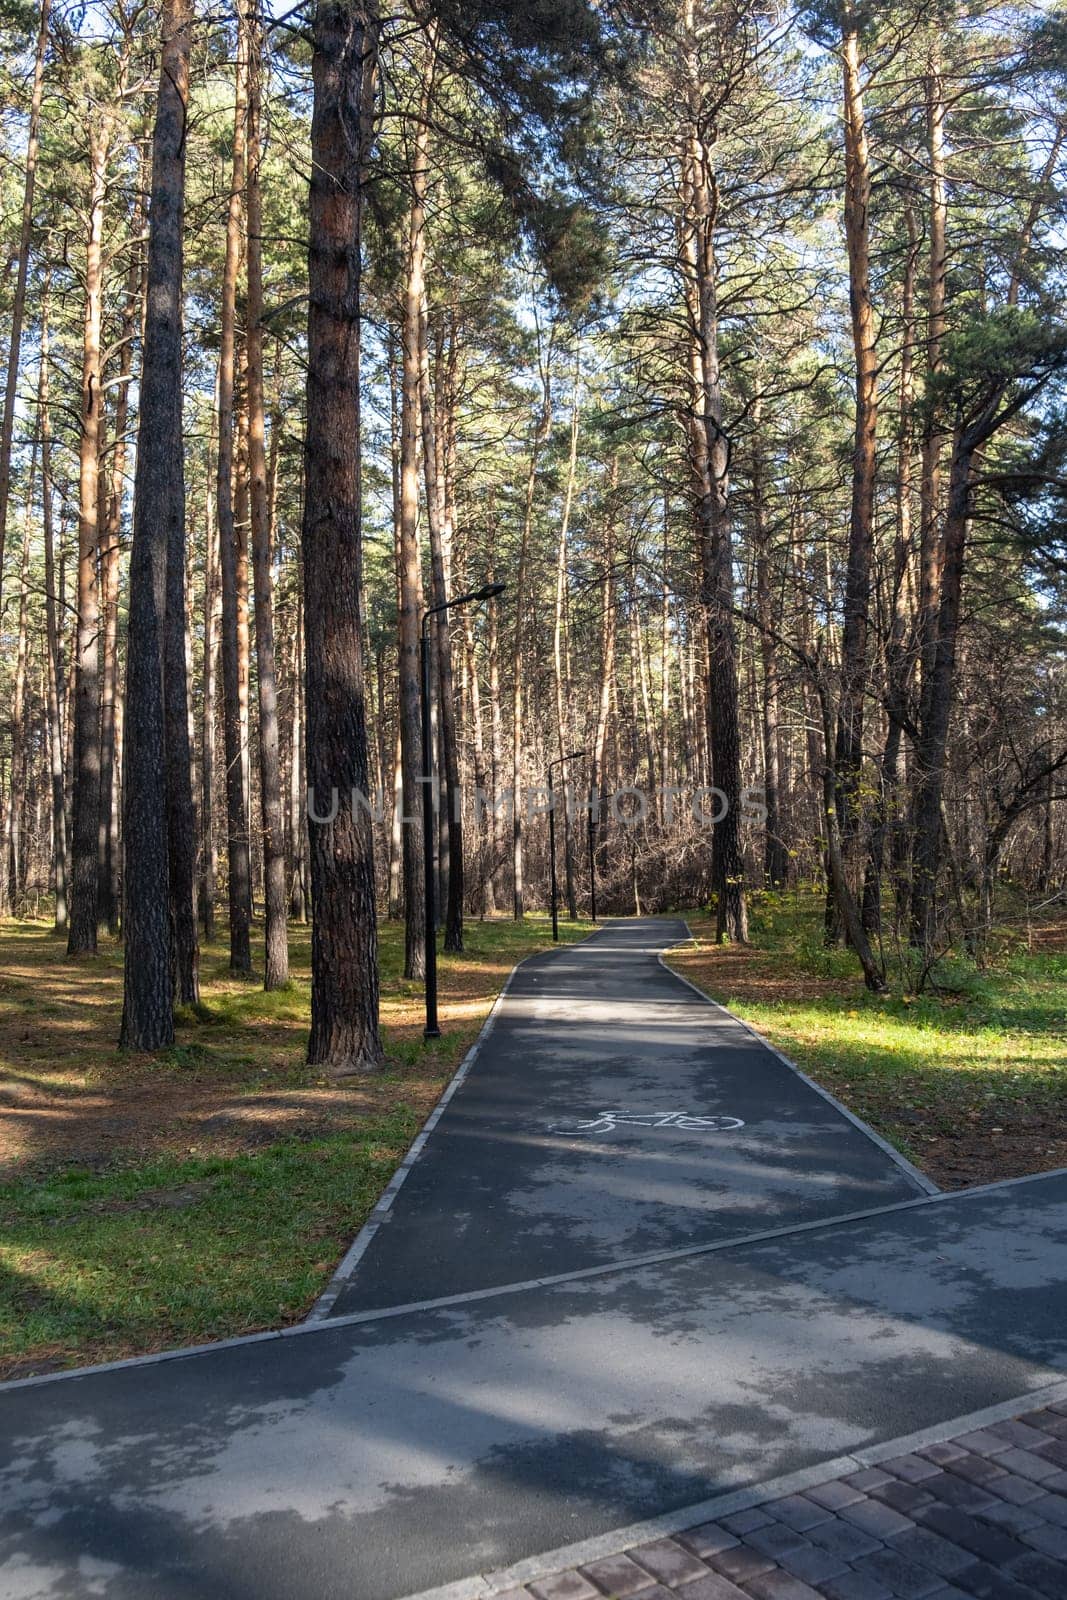 Walking path in a city park. Pedestrian path made of asphalt in the forest. Place for walks, relaxation and sports